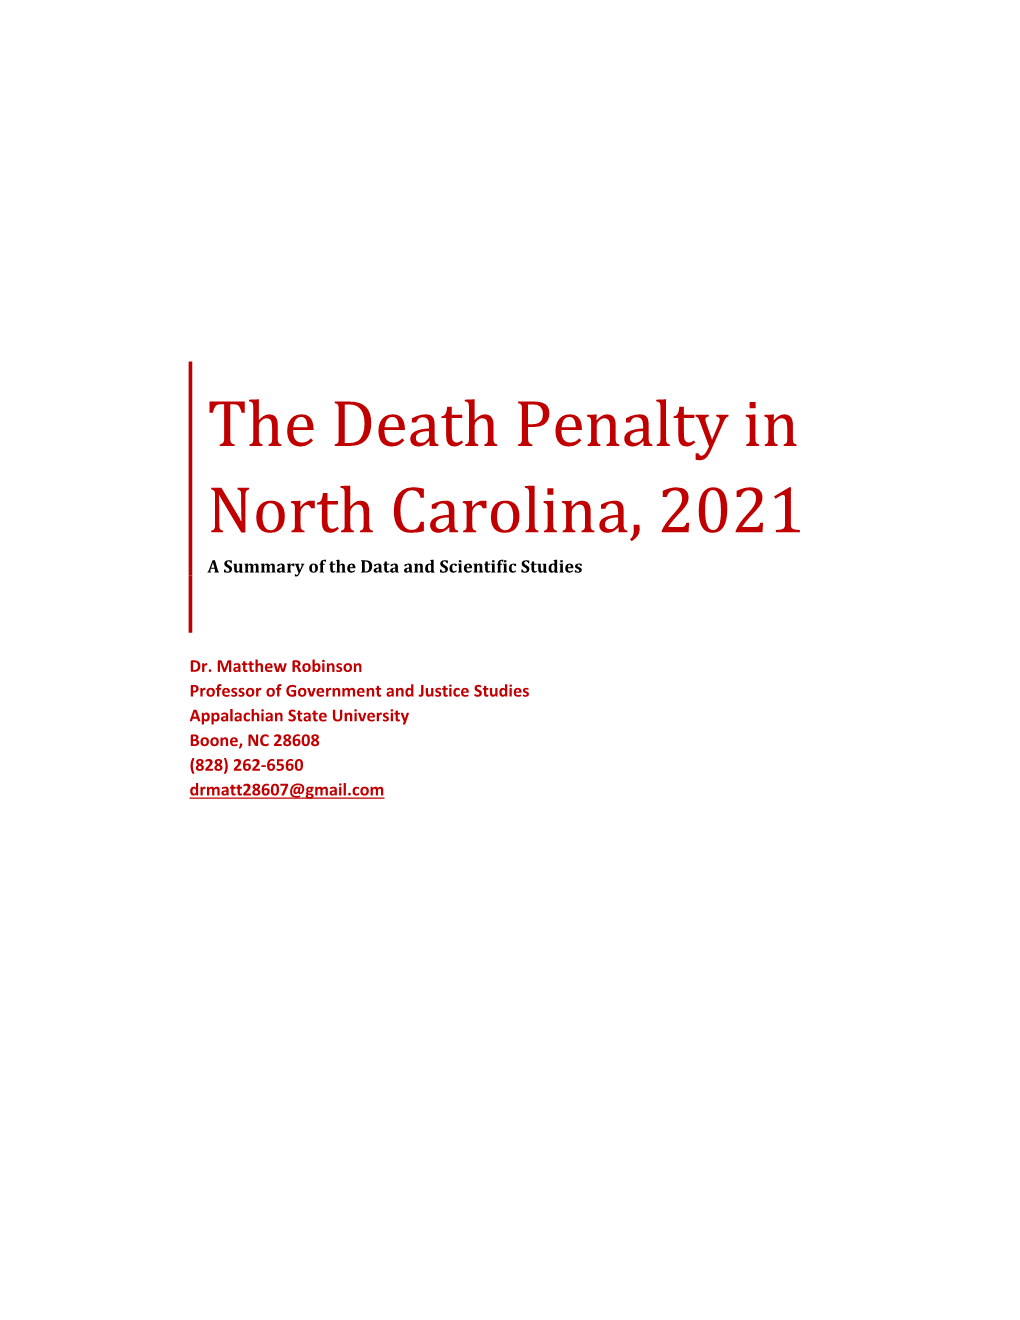 The Death Penalty in North Carolina, 2021 a Summary of the Data and Scientific Studies